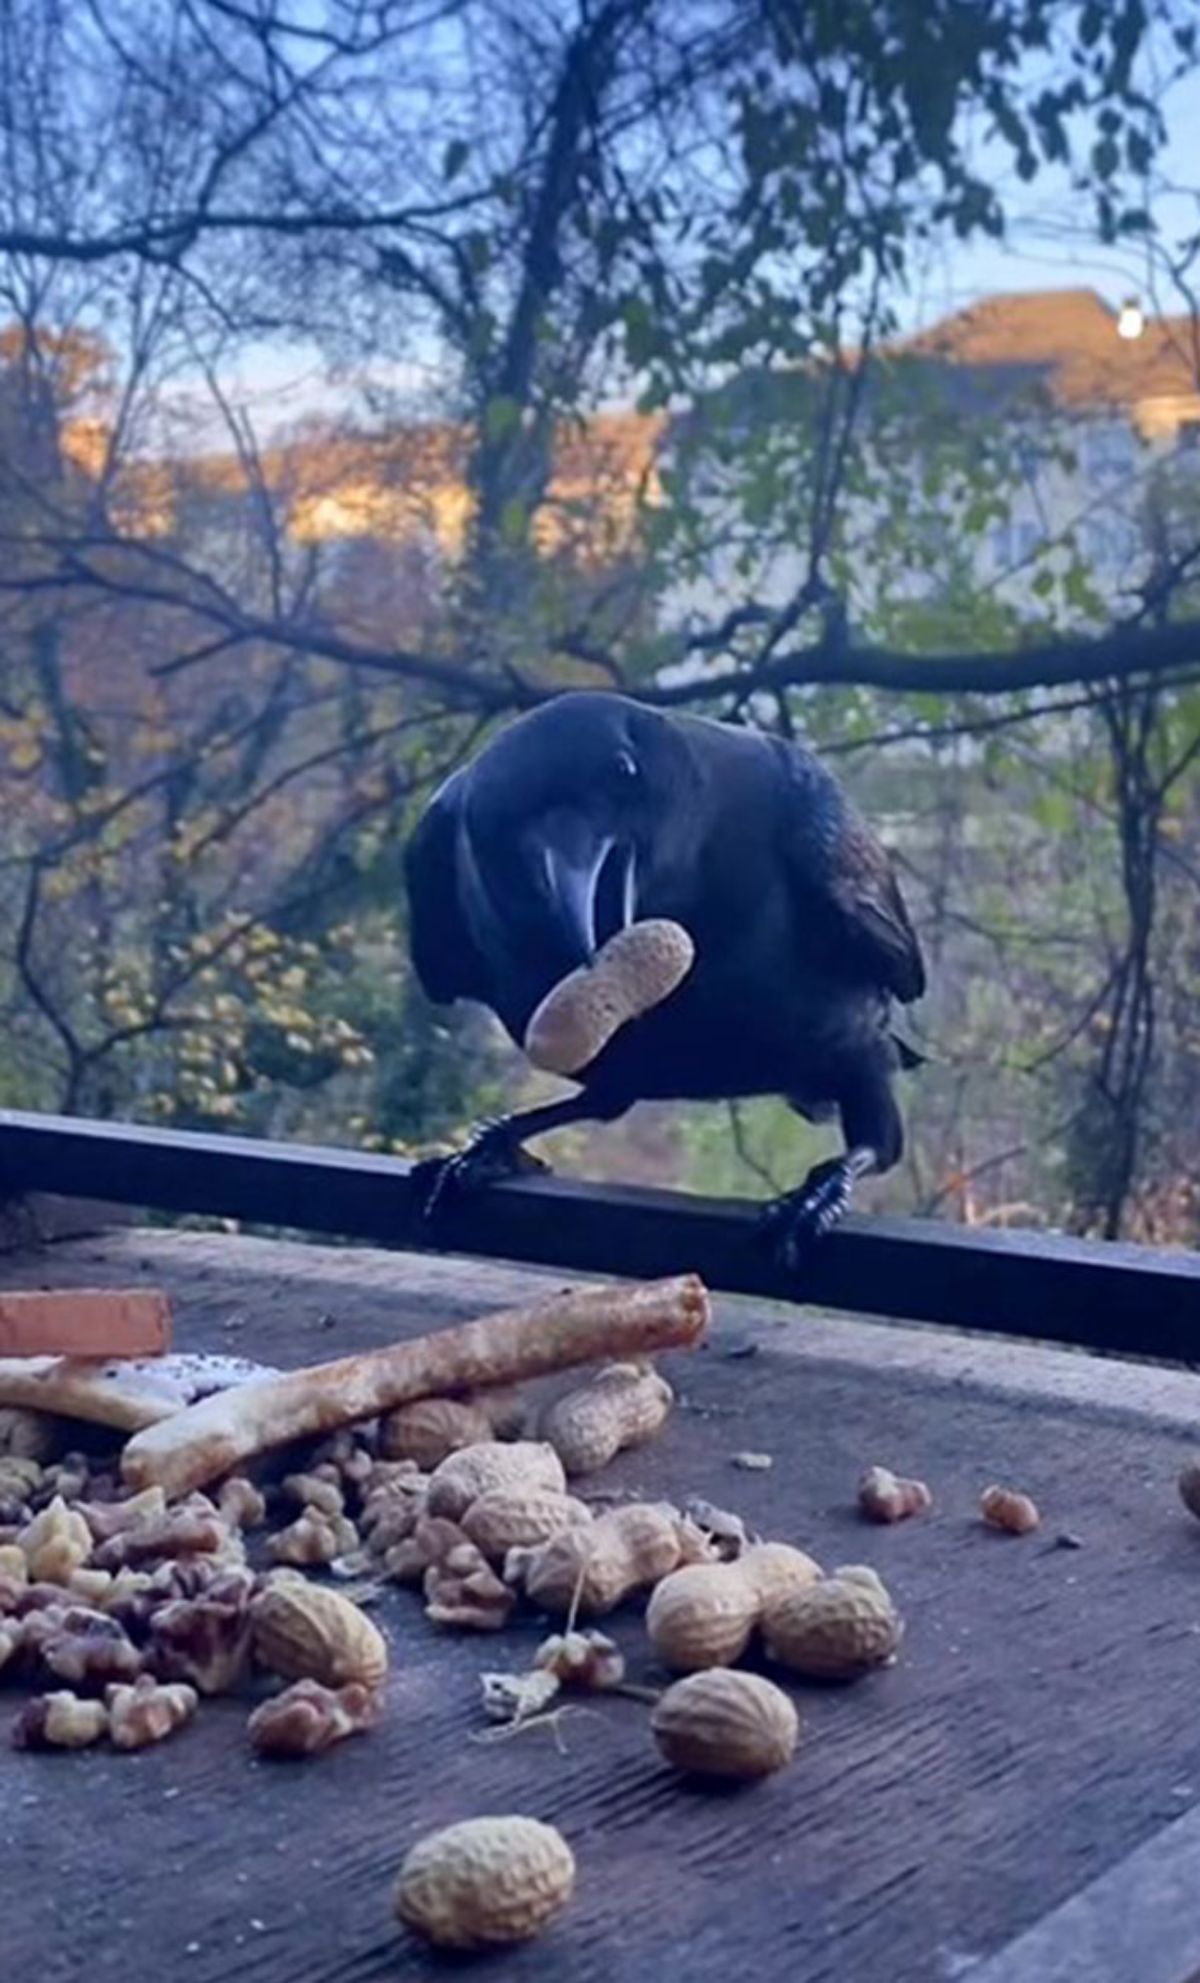 crow standing on a black railing with a peanut in its mouth and a pile of peanuts and nuts under it